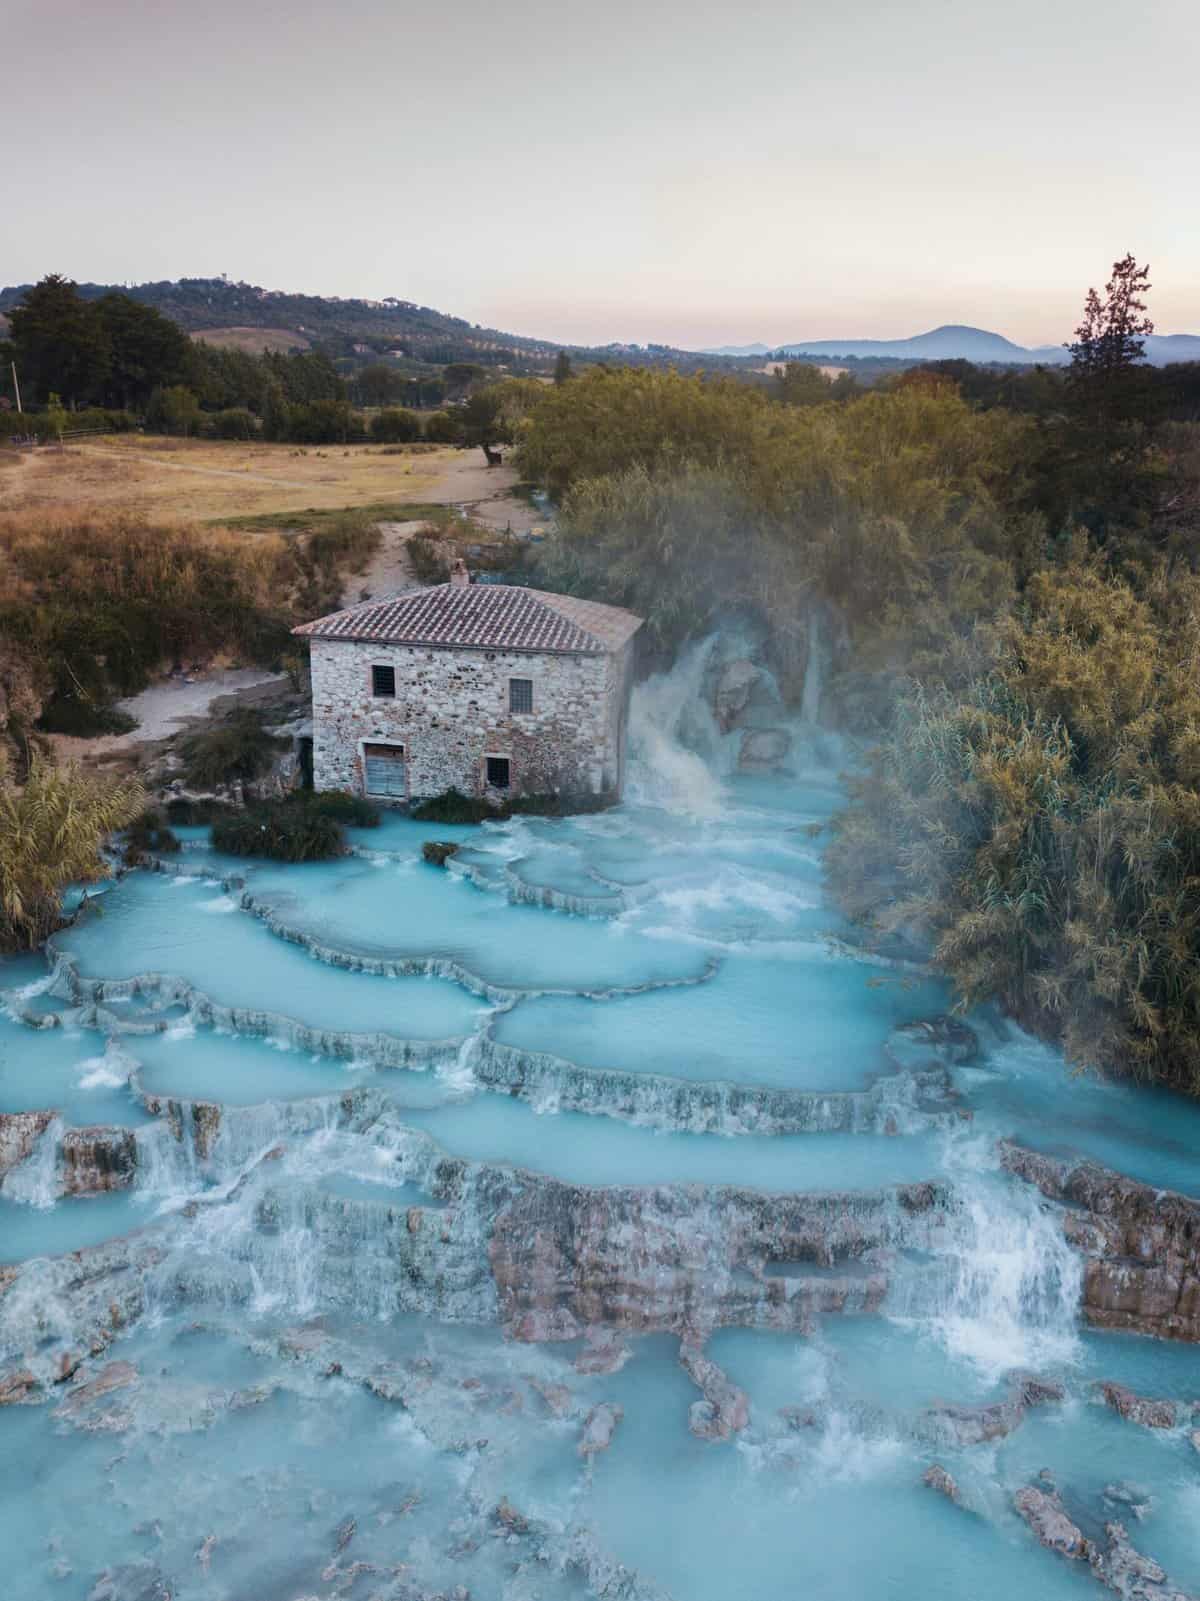 Coco Tran — Aesthetic Travel Blog By Film Photographer Coco Tran https://cocotran.com/visiting-hot-springs-tuscany-saturnia-italy/